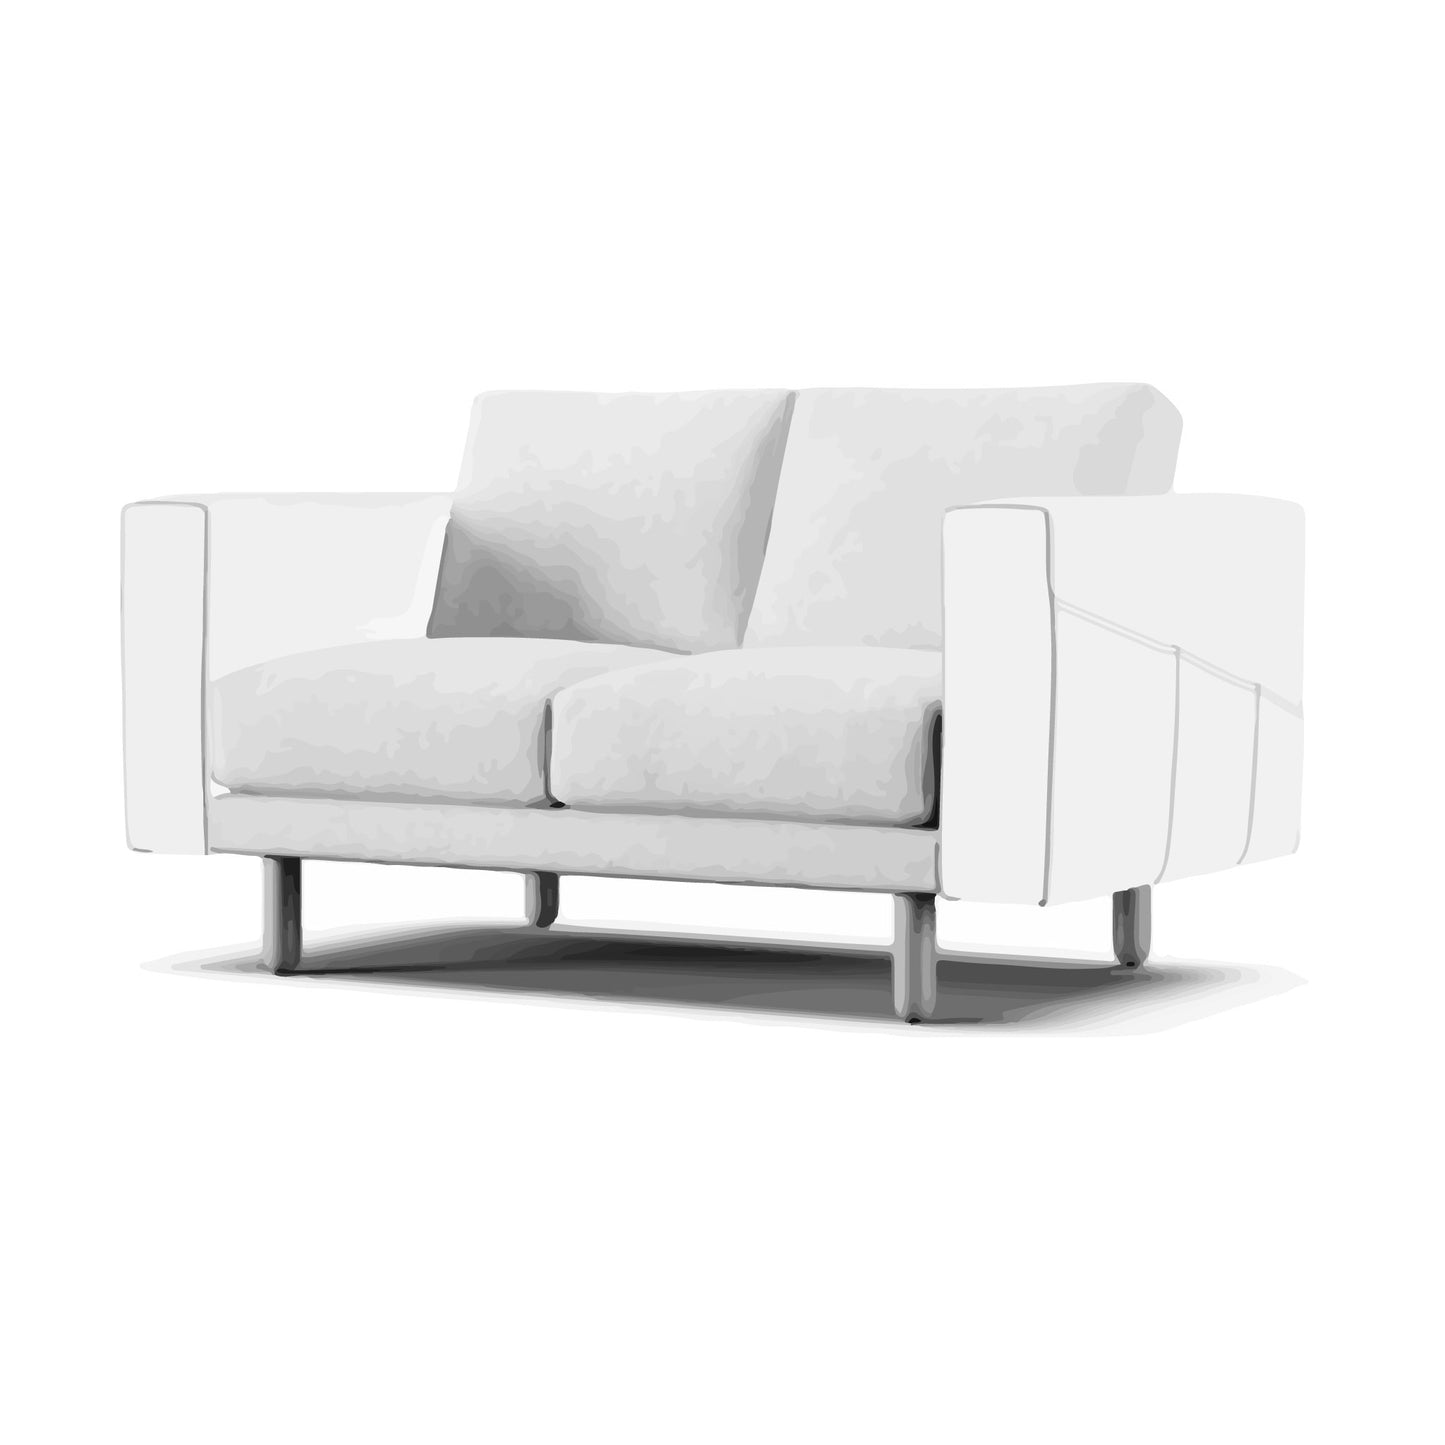 Norsborg 2 Seater Sofa Section Only Cover